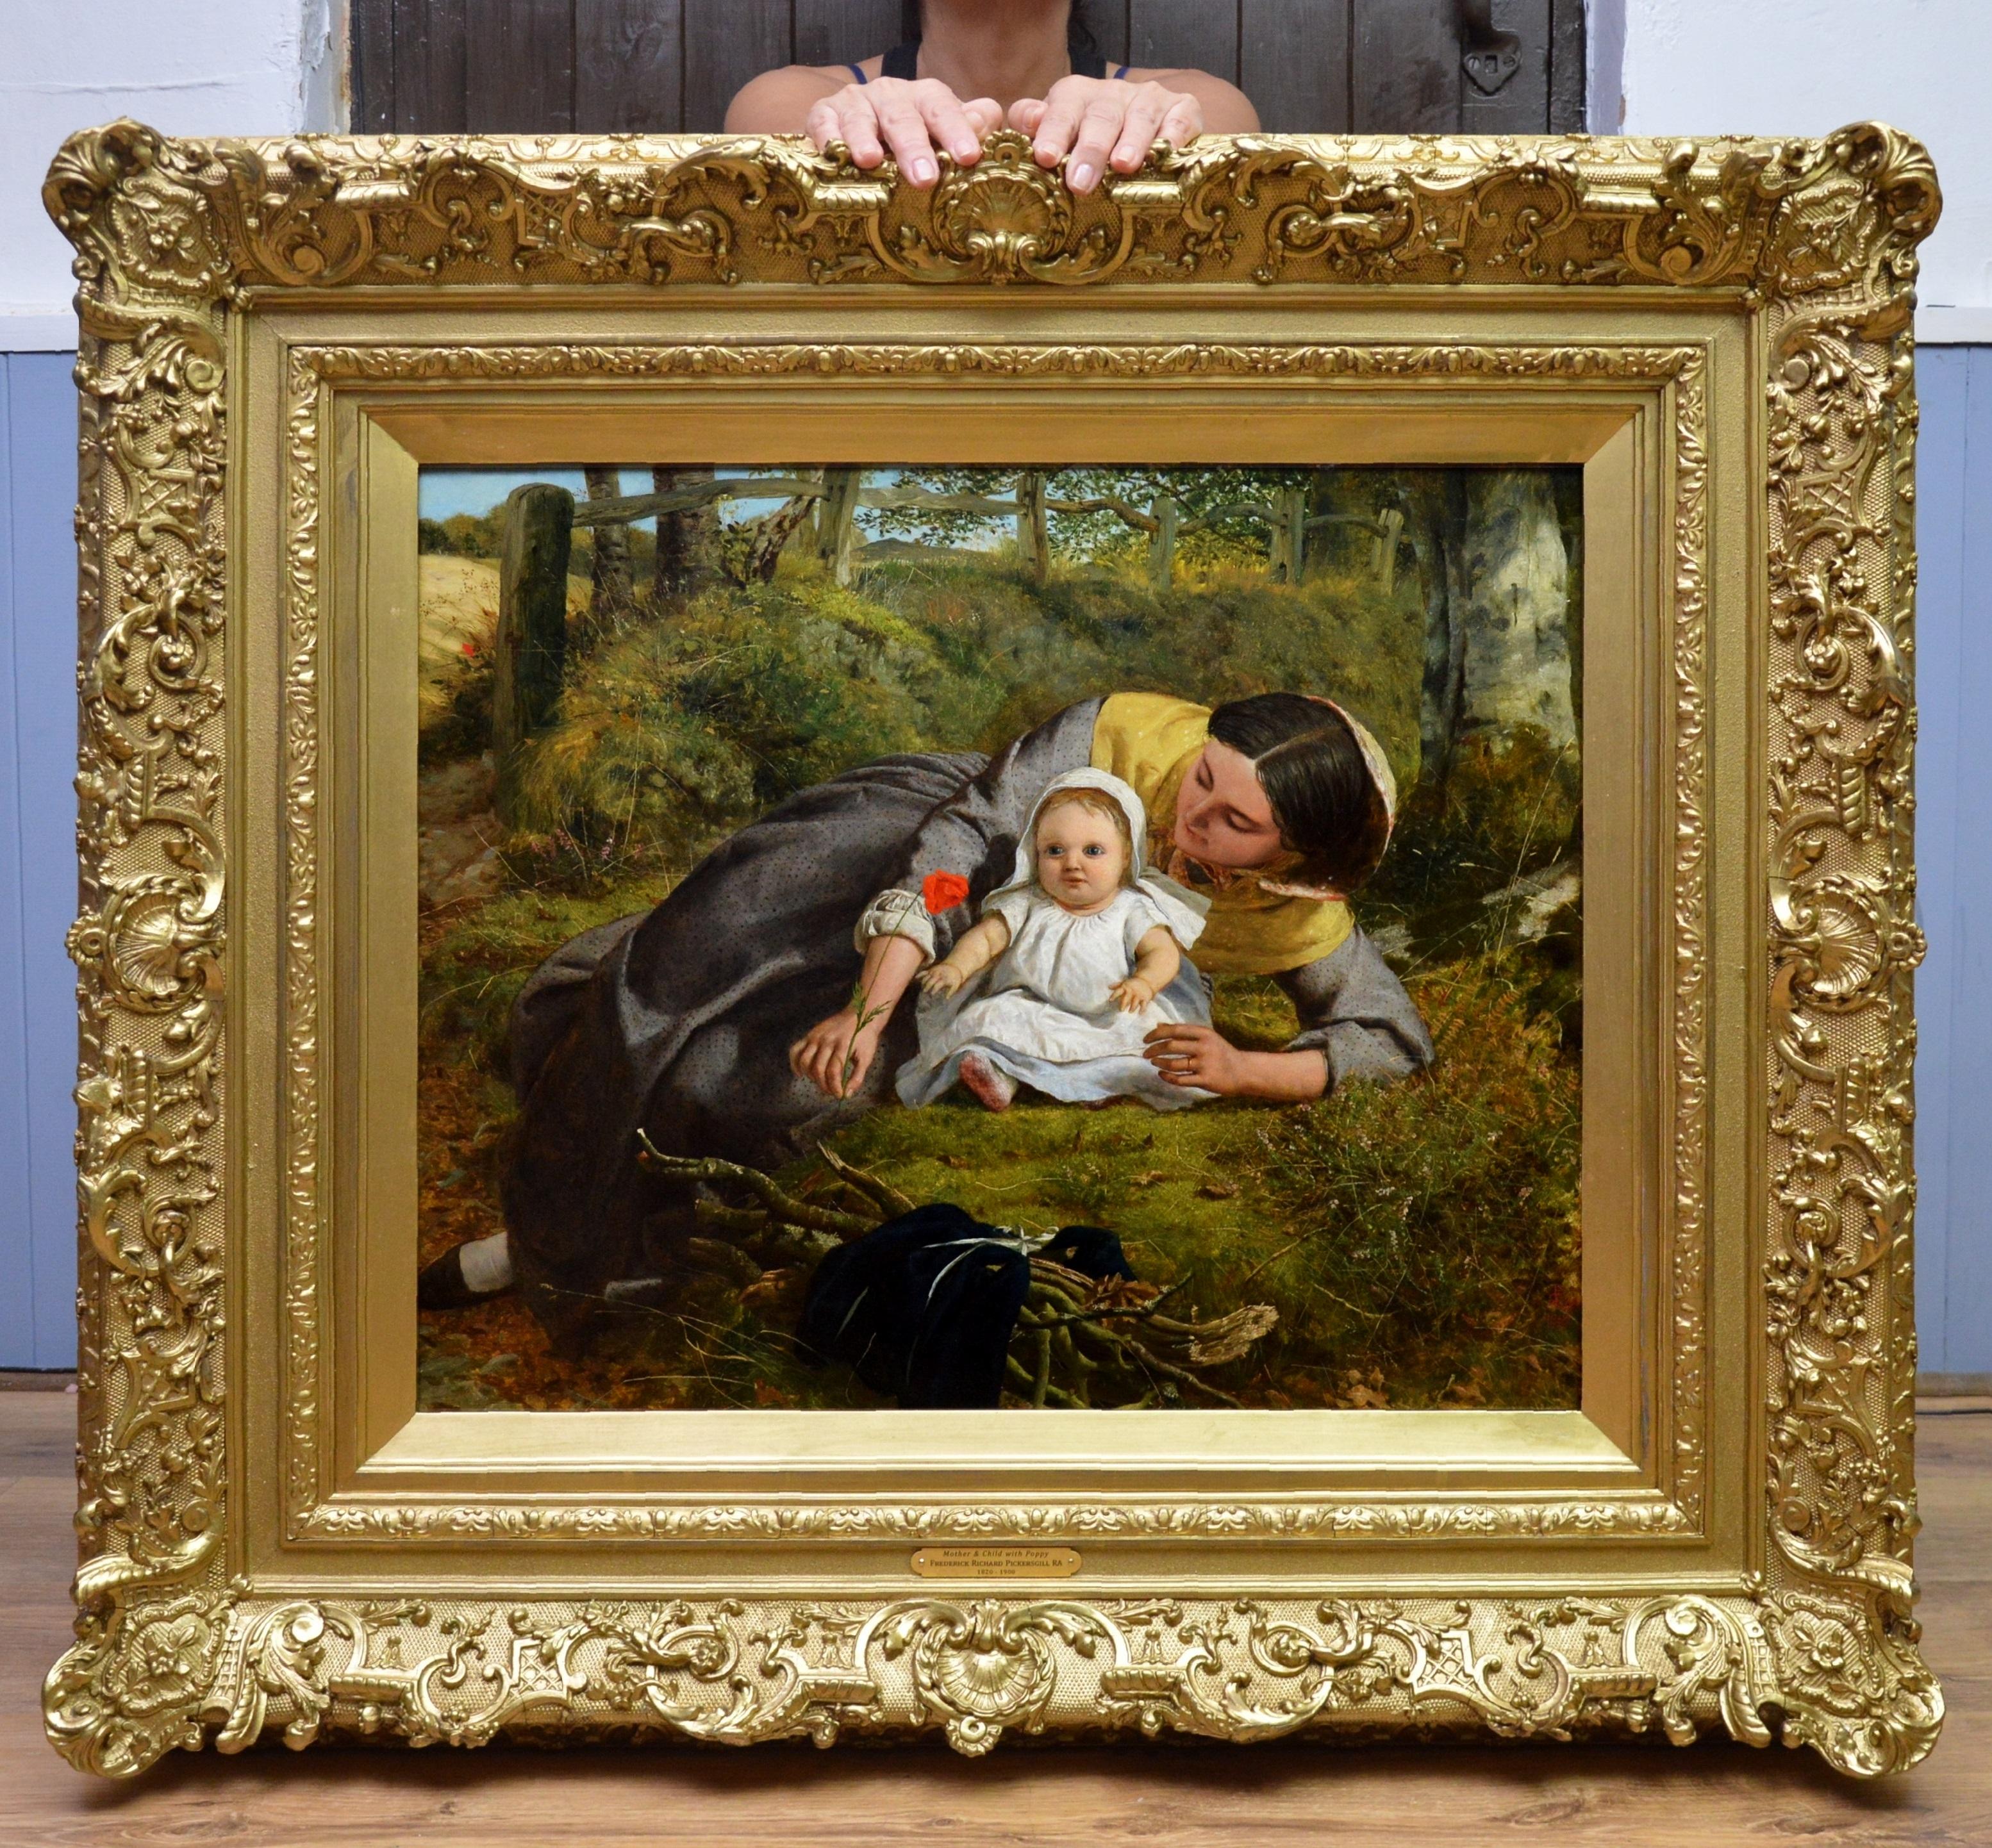 Mother & Child with Poppy - Mid 19th Century PreRaphaelite Oil Painting - 1862 - Brown Landscape Painting by Frederick Richard Pickersgill